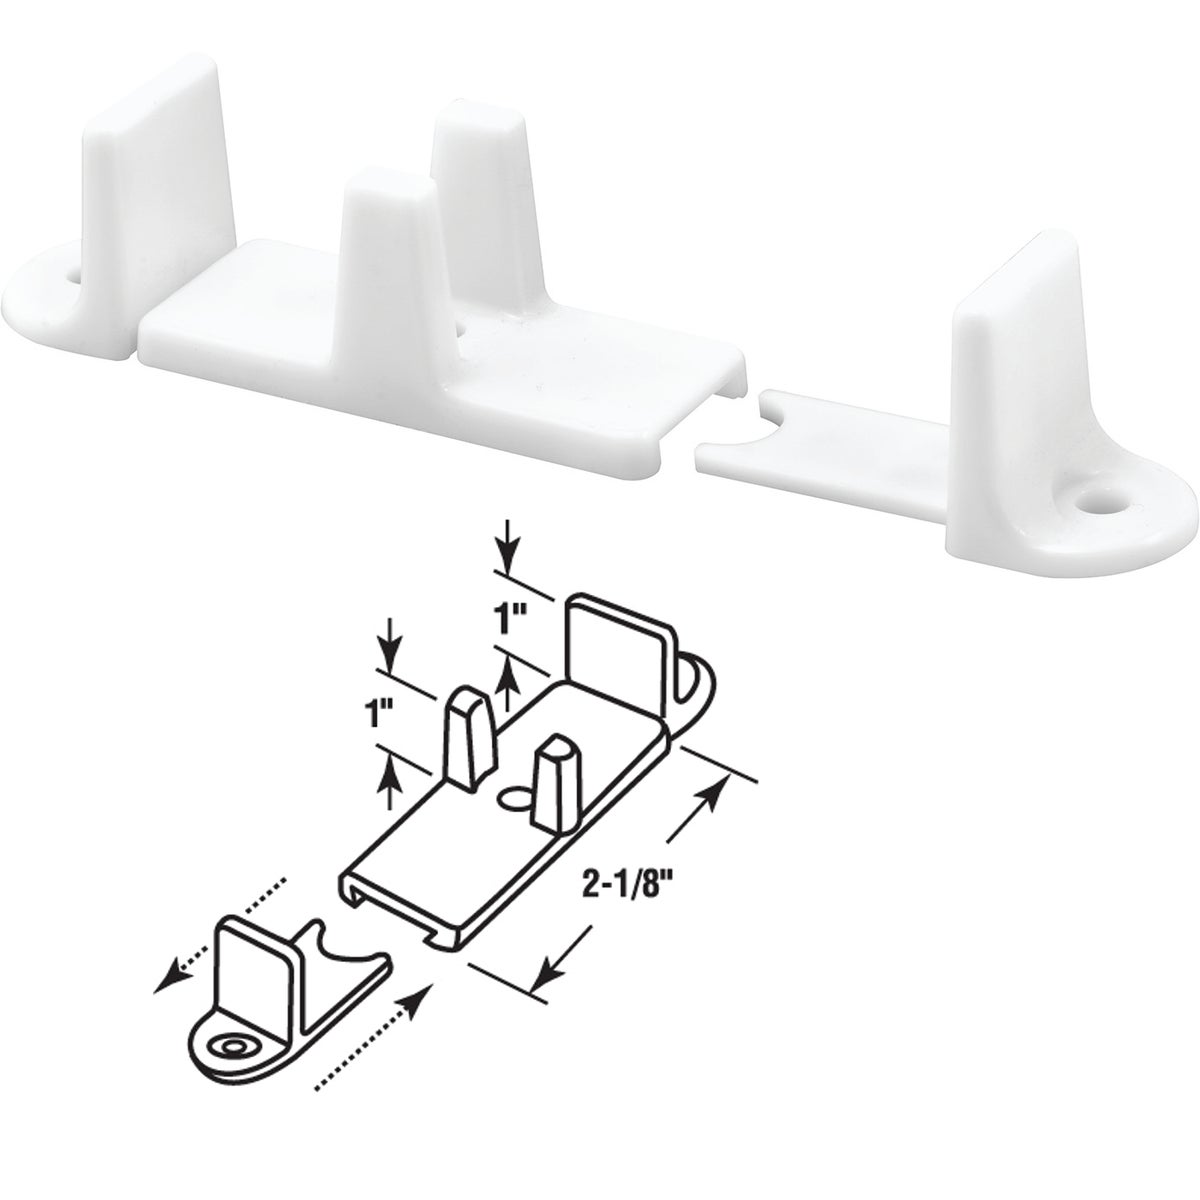 Item 236748, Nylon 3-piece adjustable floor guide for by-passing doors.